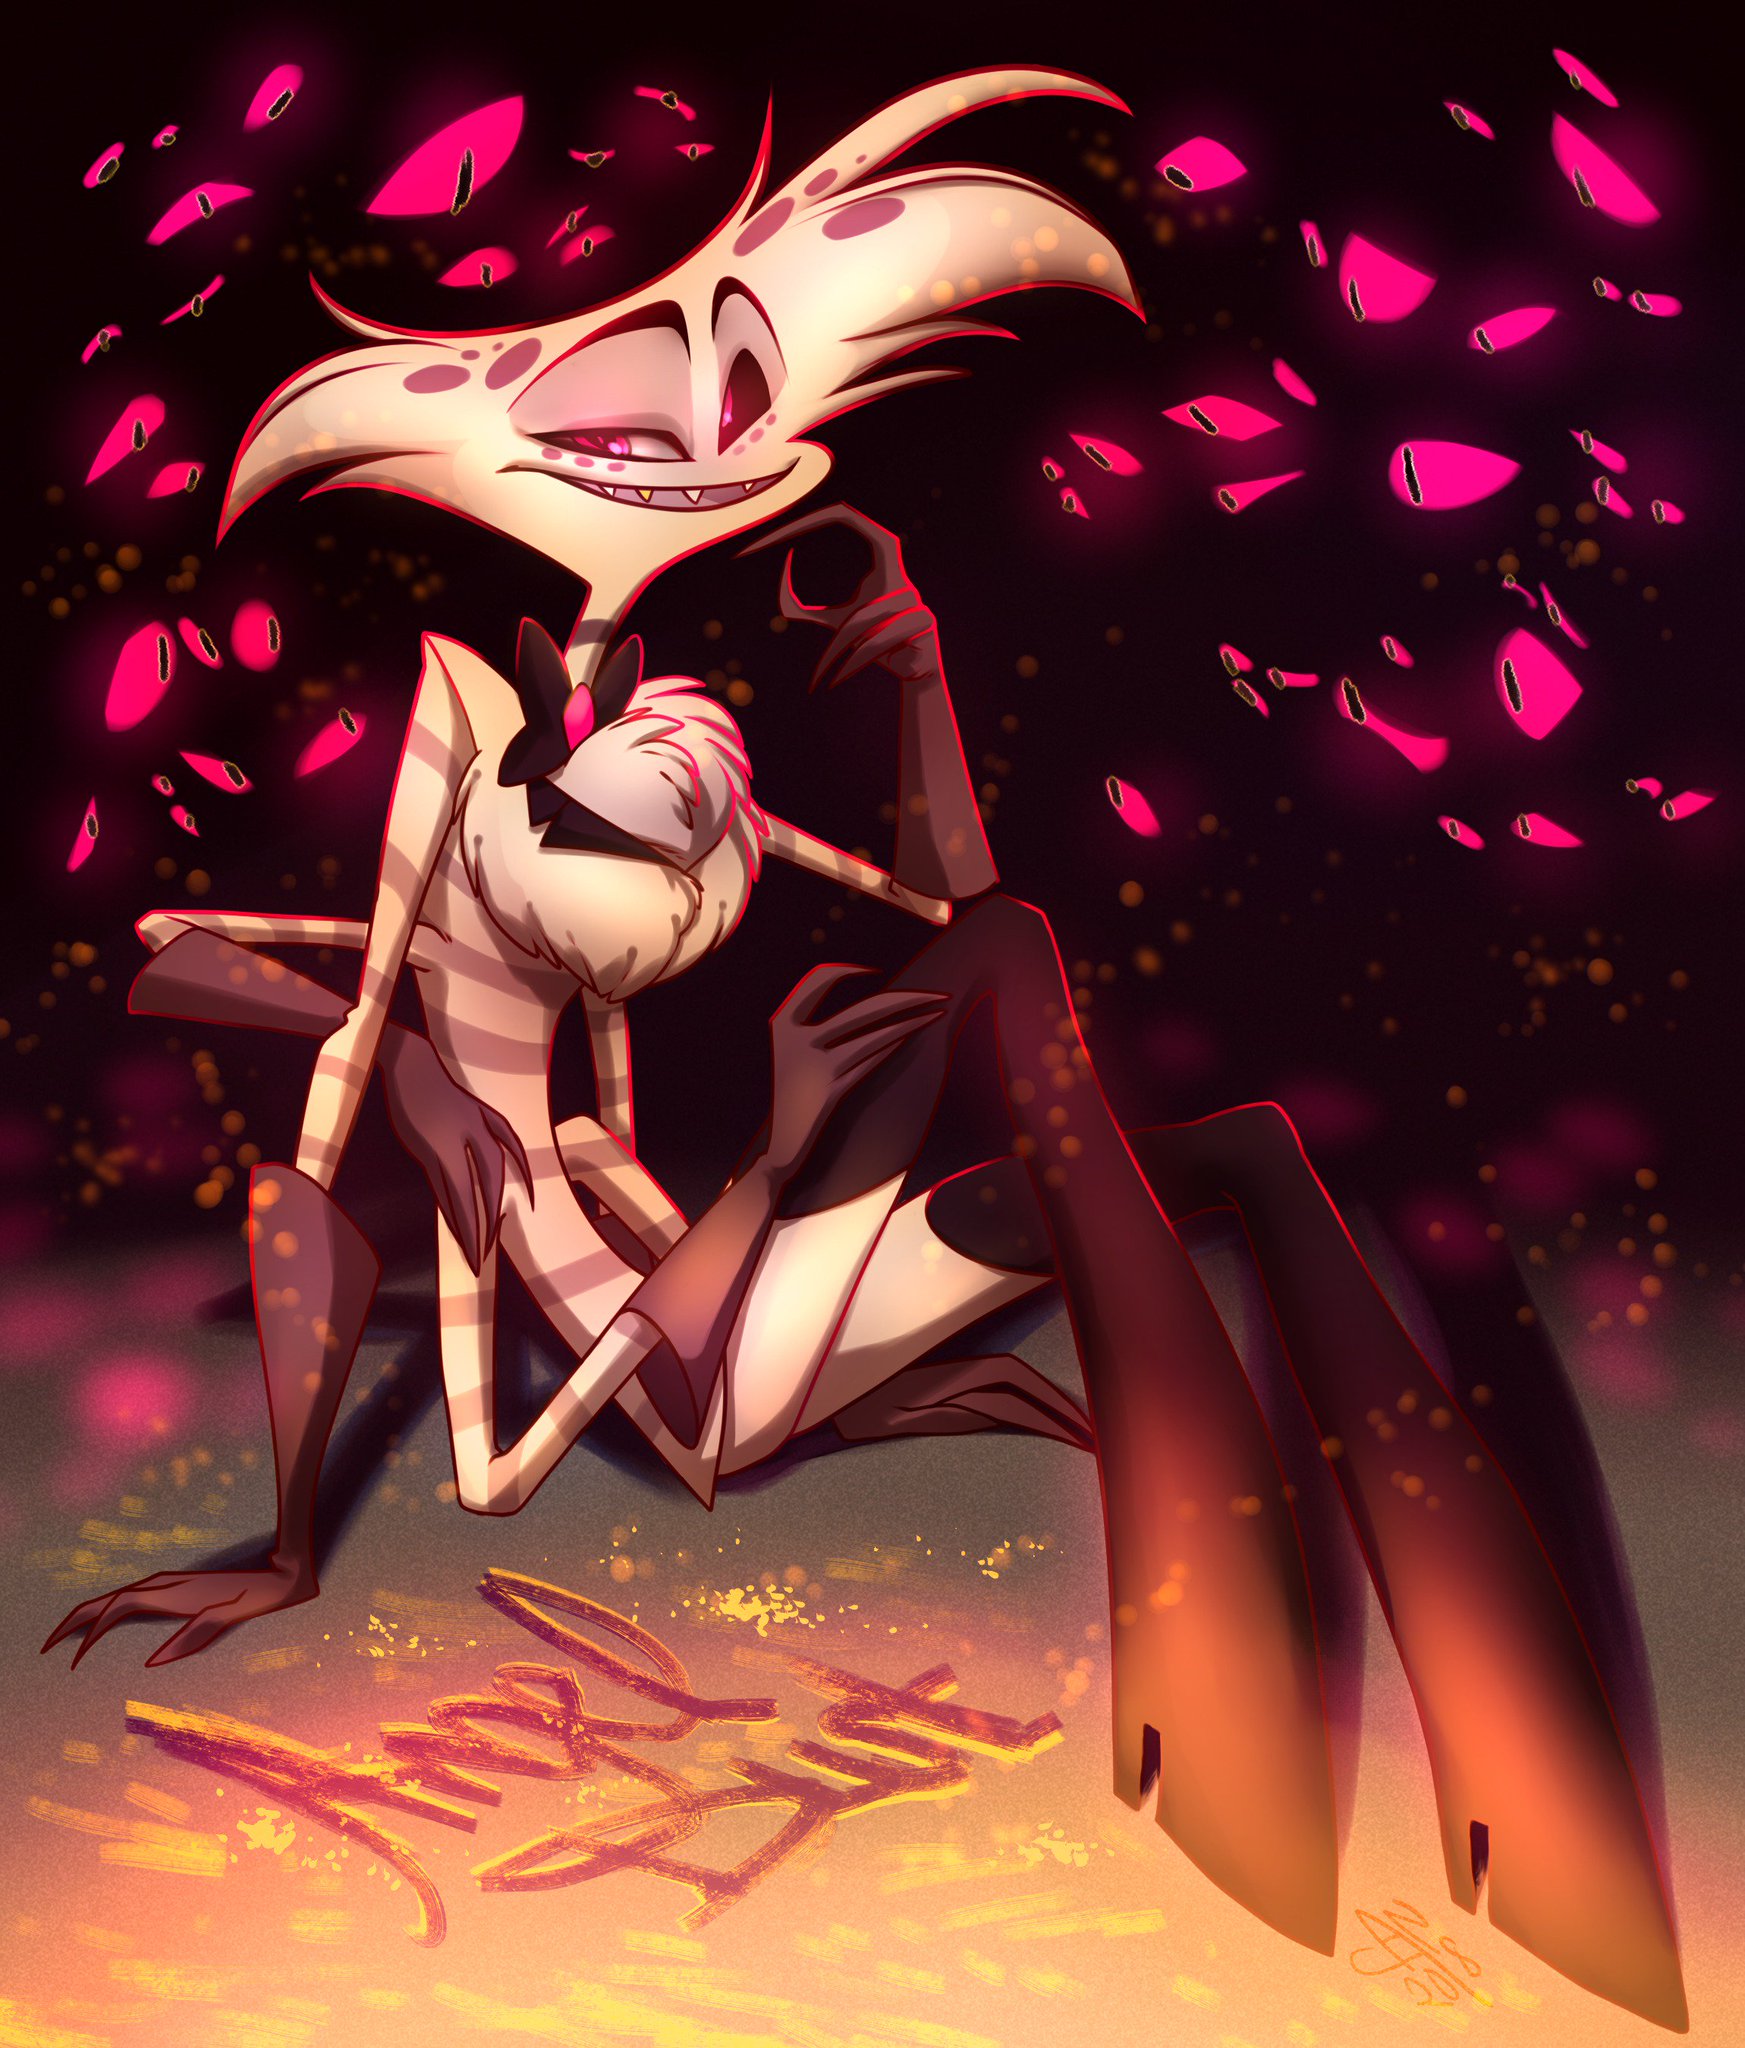 Fanart for the awesome @VivziePop with her character #angeldust ❤ Had a lot...